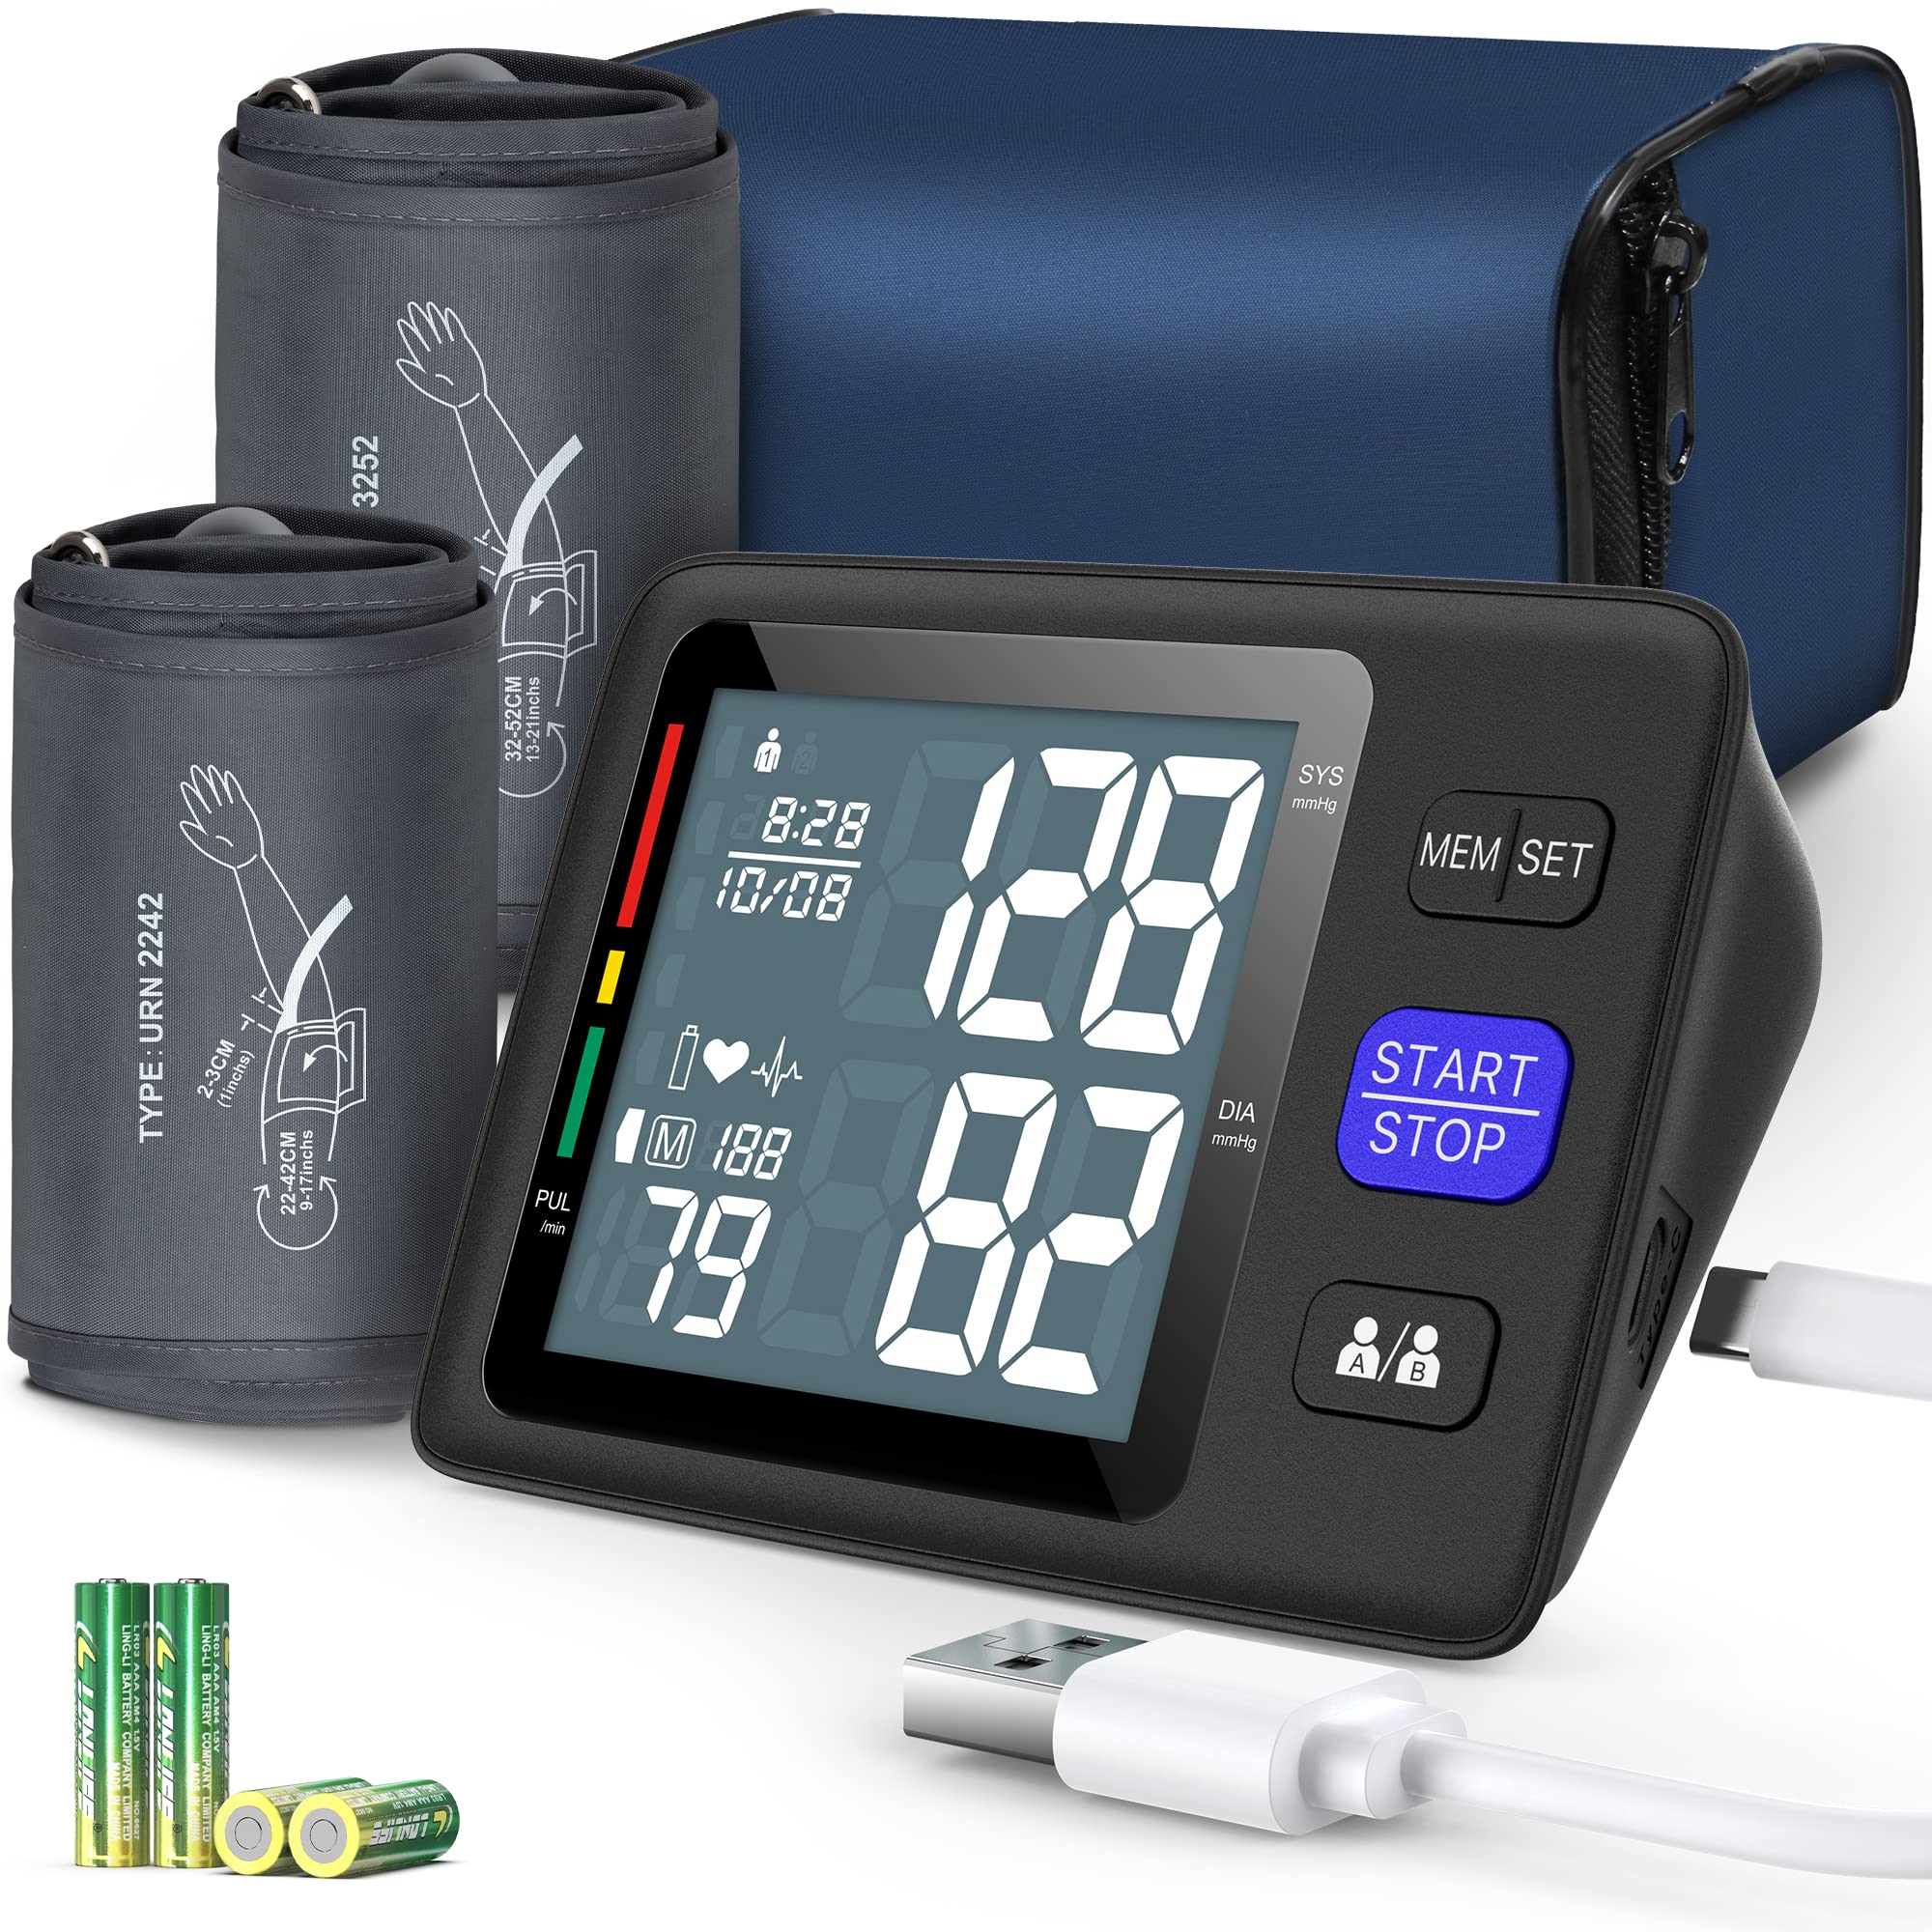 14 Blood Pressure Monitors with Plus-Size Cuffs for Large Arms - It's time  you were seen ⟡ Body Liberation Photos